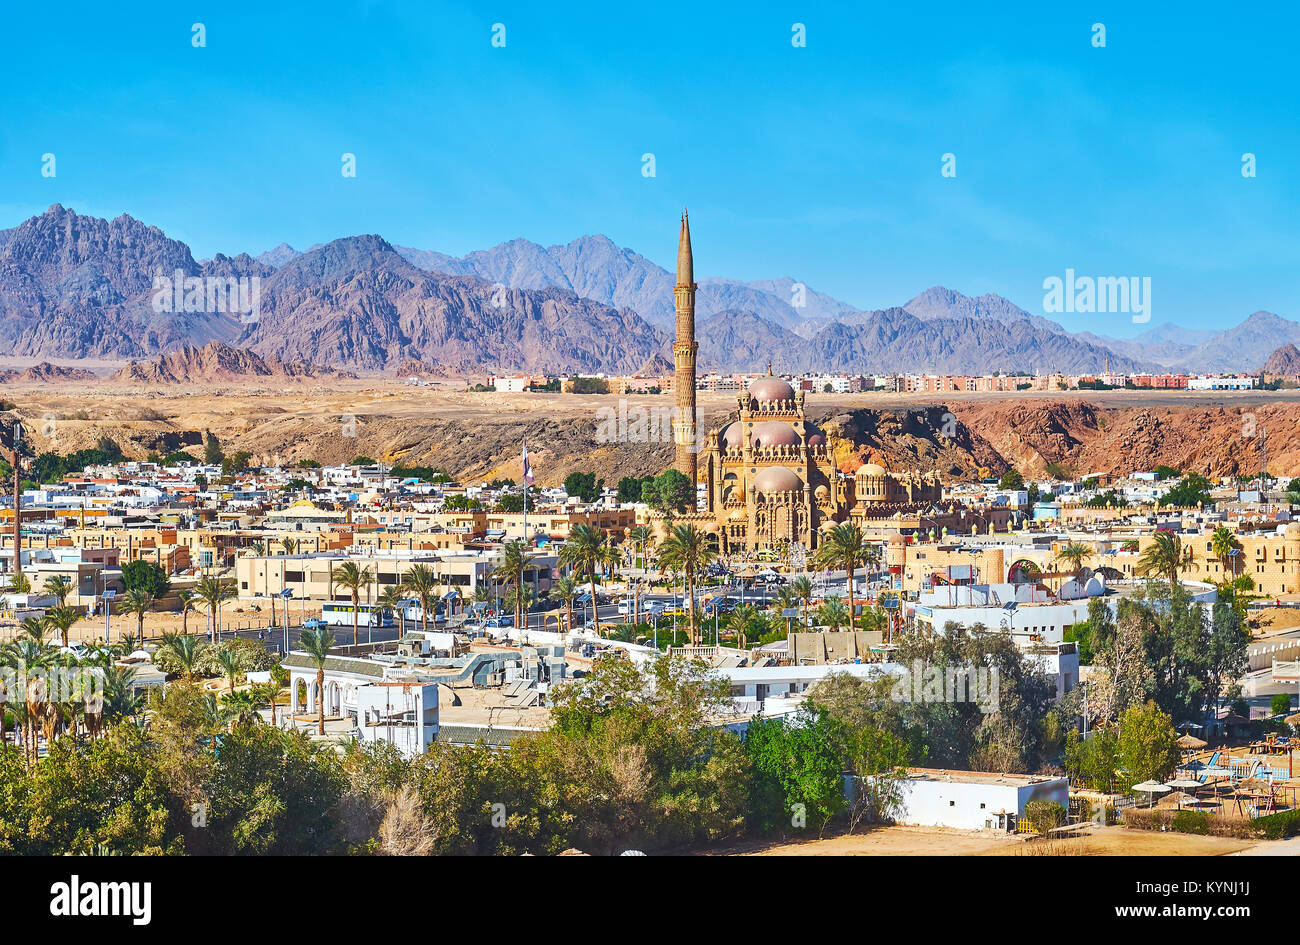 Aerial view of Sharm Al Maya district with its main landmark - Al Sahaba Mosque, surrounded by tourist market buildings, cafes and hotels with giant r Stock Photo